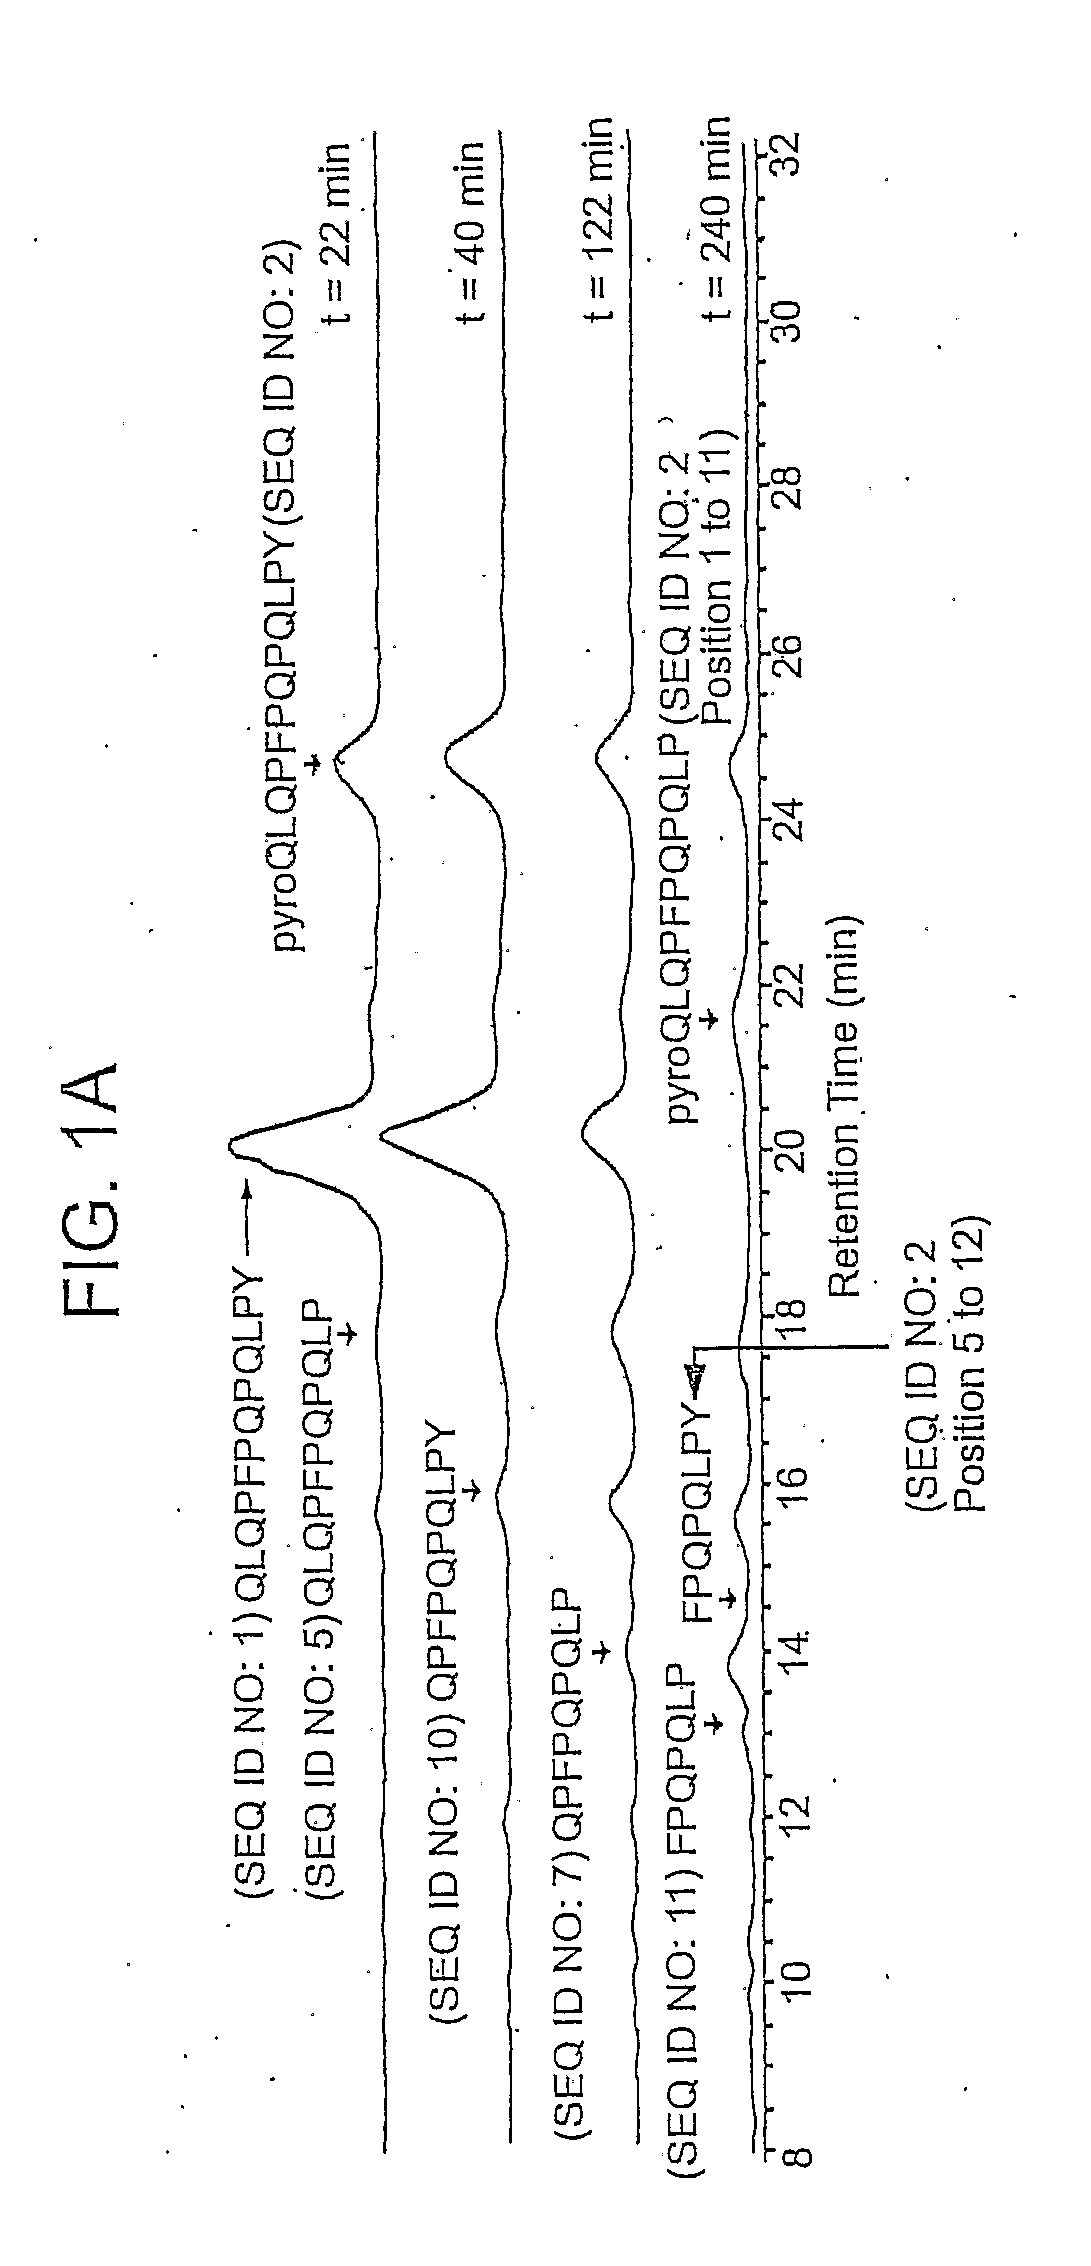 Peptides for Diagnostic and Therapeutic Methods for Celiac Sprue